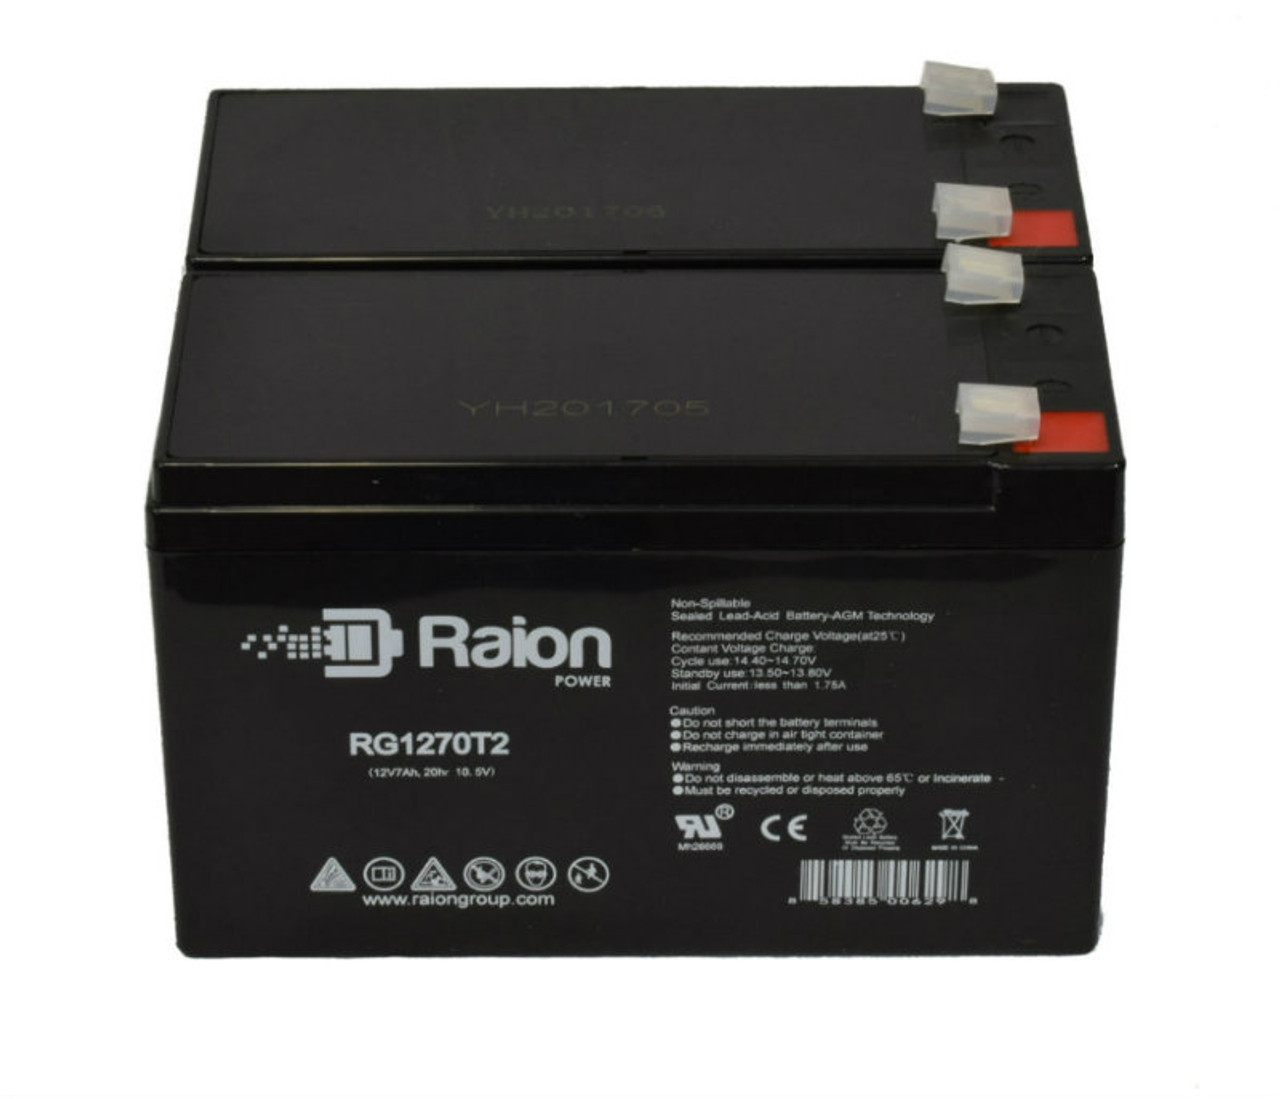 Raion Power Replacement RG1270T2 12V 7Ah Battery for BHM Medical ERLI600 Patient Lift - 2 Pack